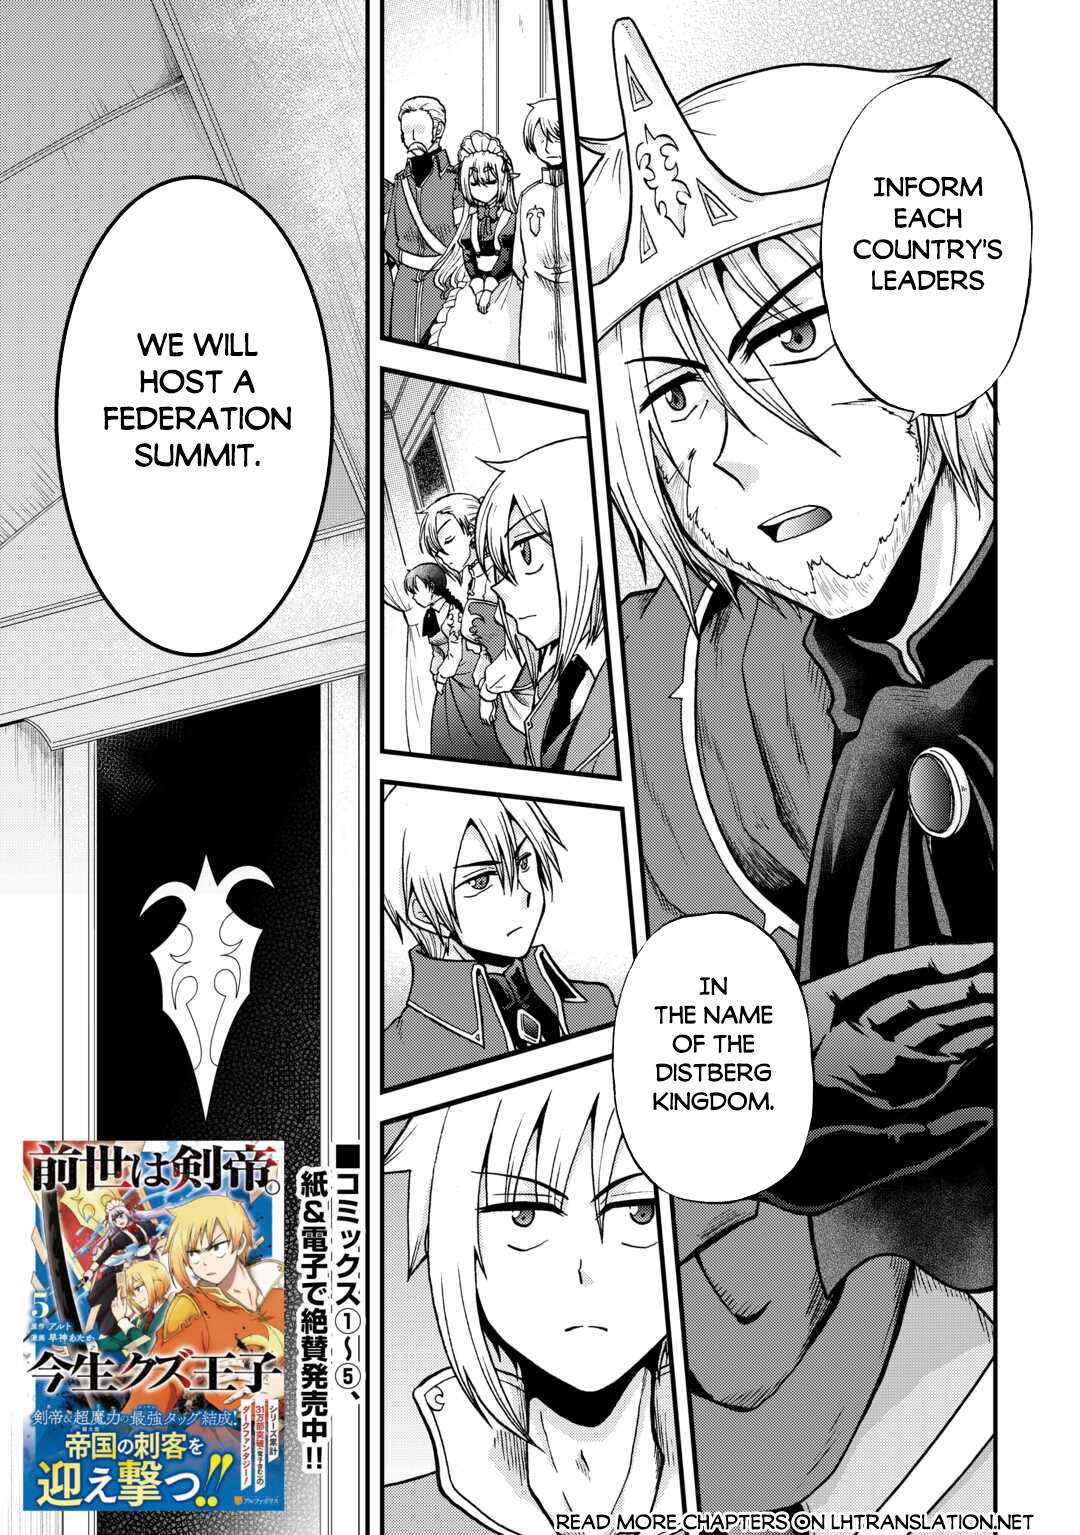 Previous Life Was Sword Emperor. This Life Is Trash Prince. - chapter 34 - #2